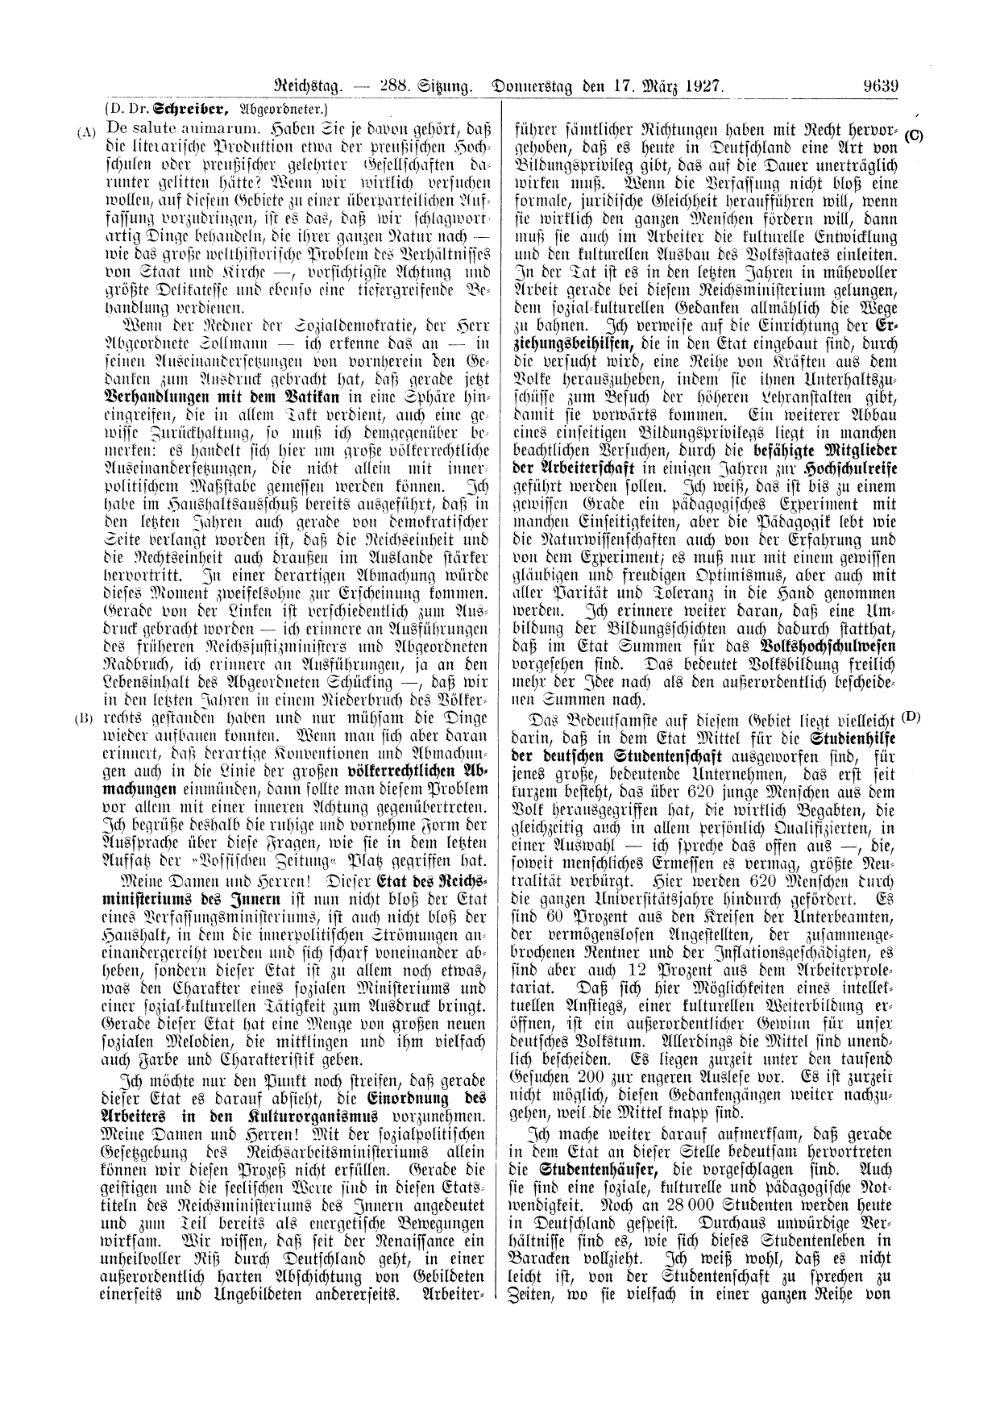 Scan of page 9639